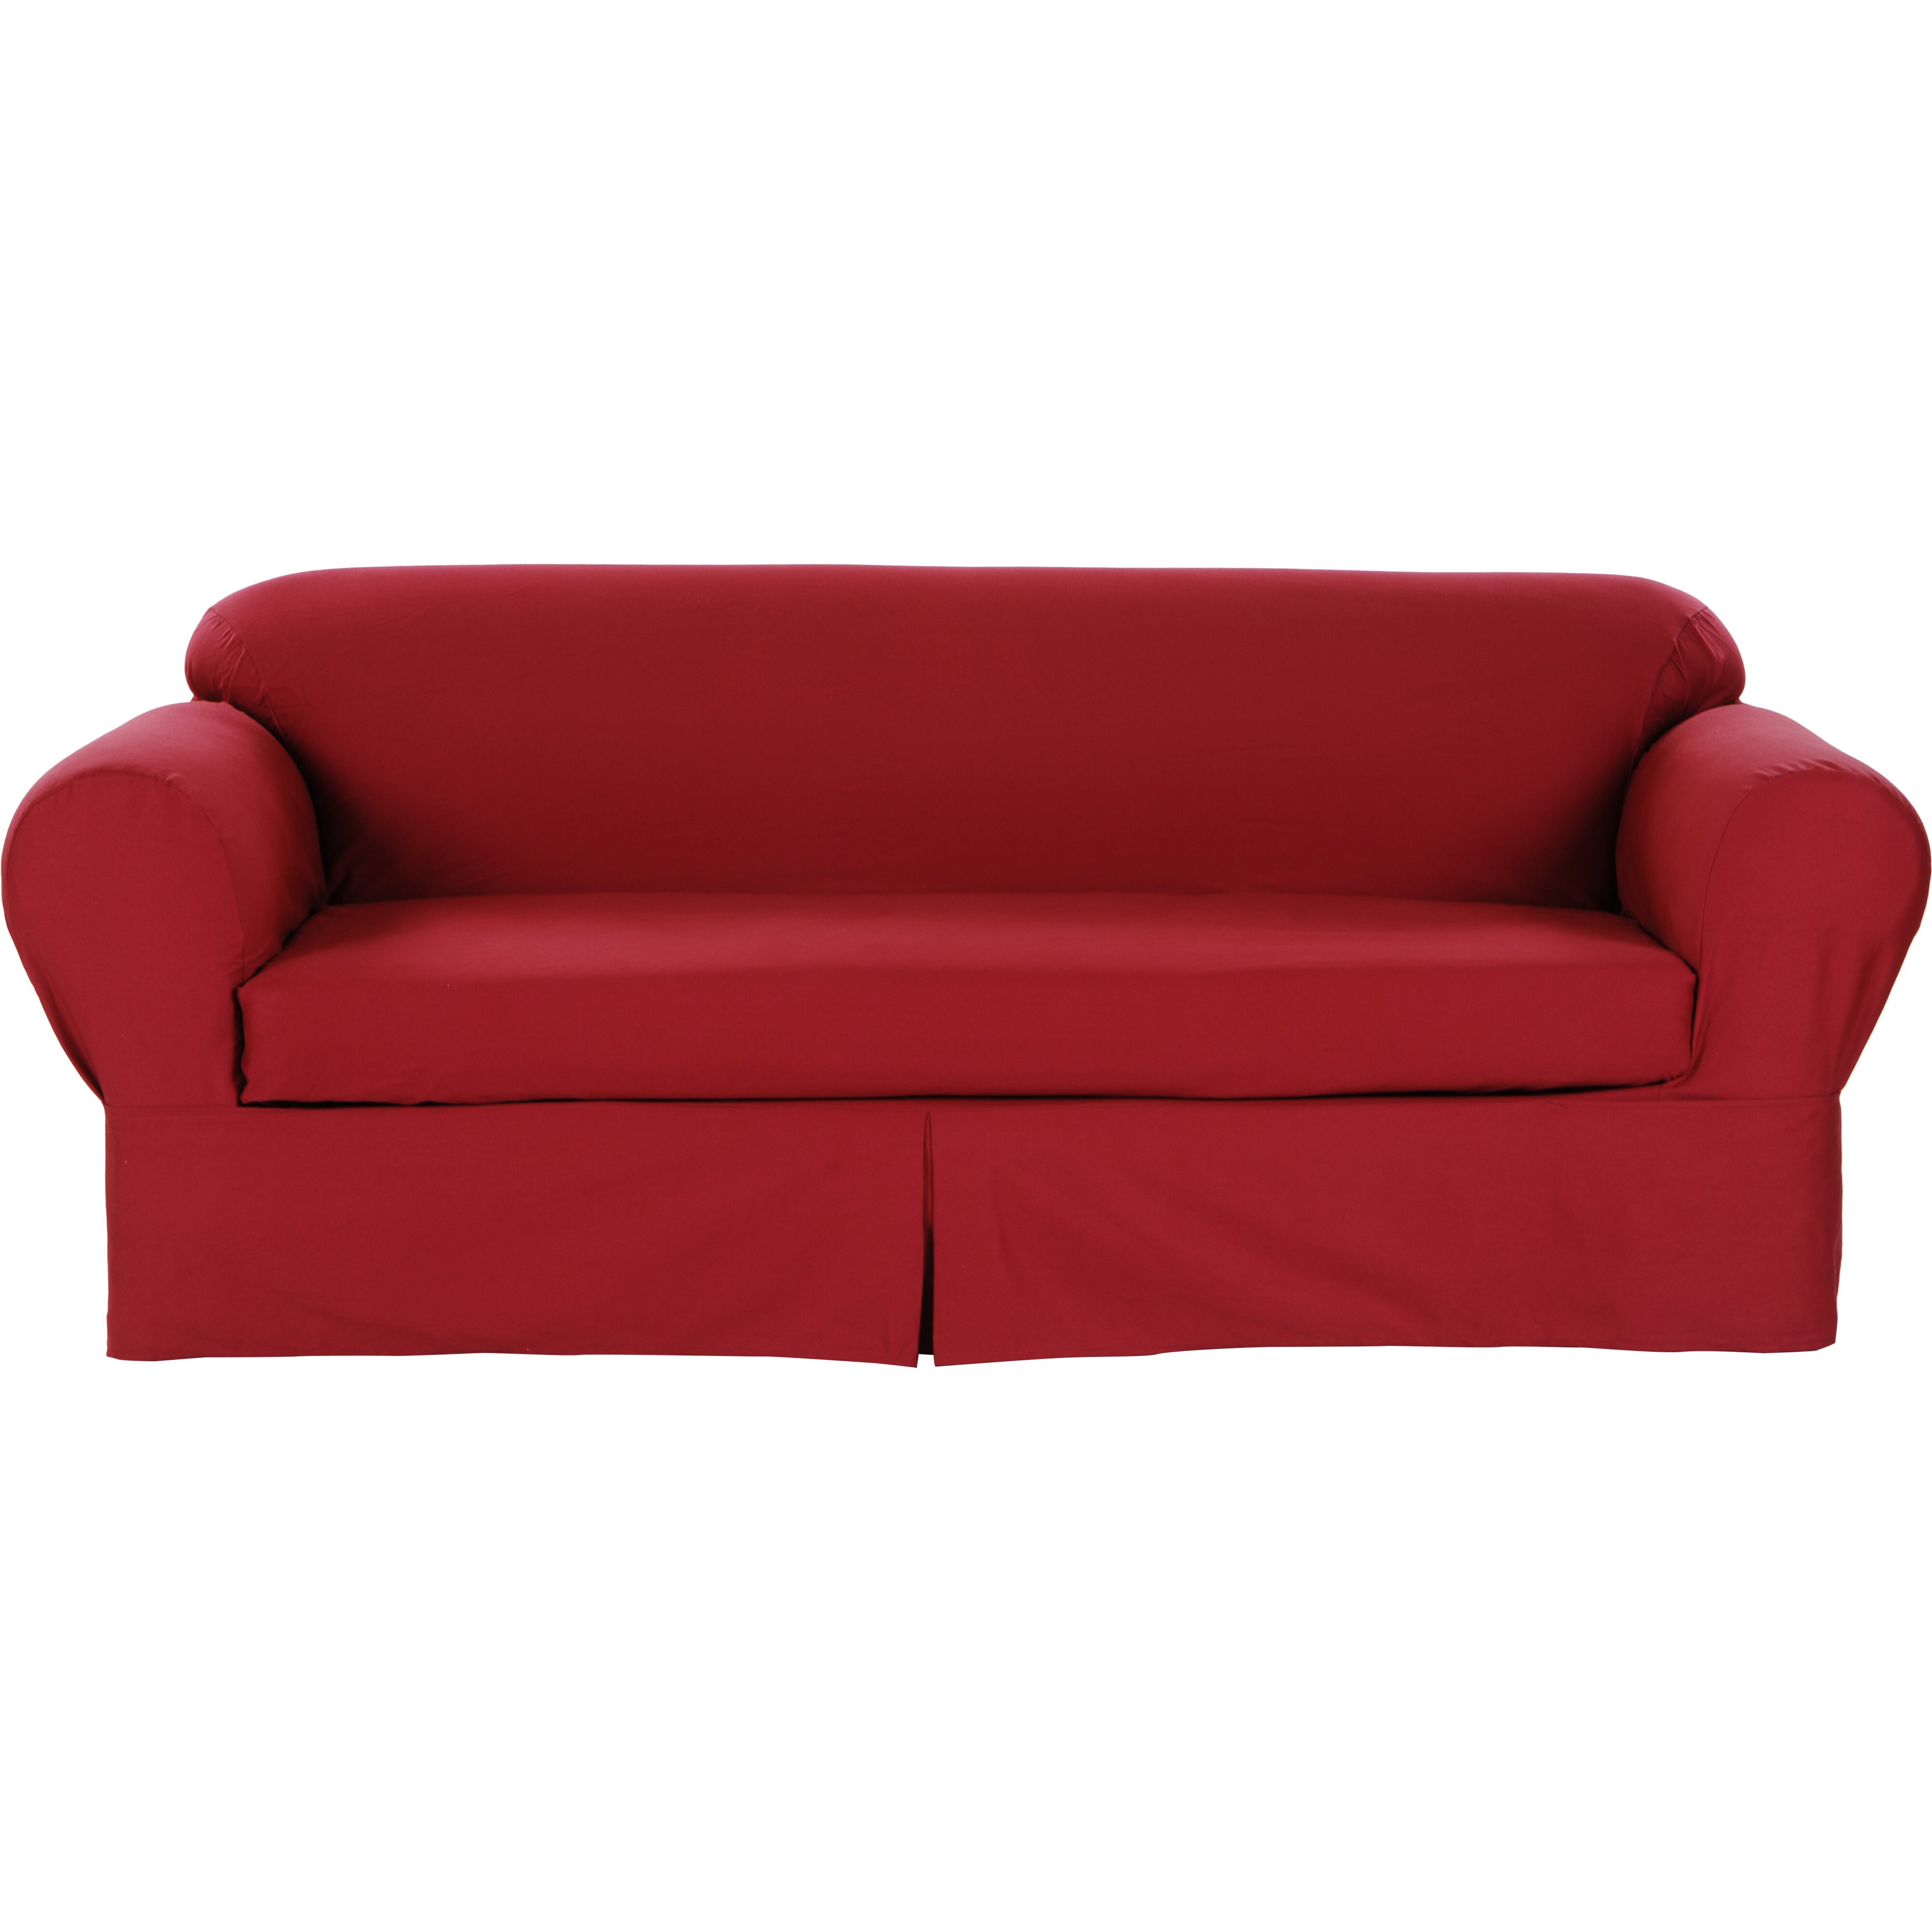 Darby Home Co Brushed Twill Sofa Slipcover & Reviews | Wayfair